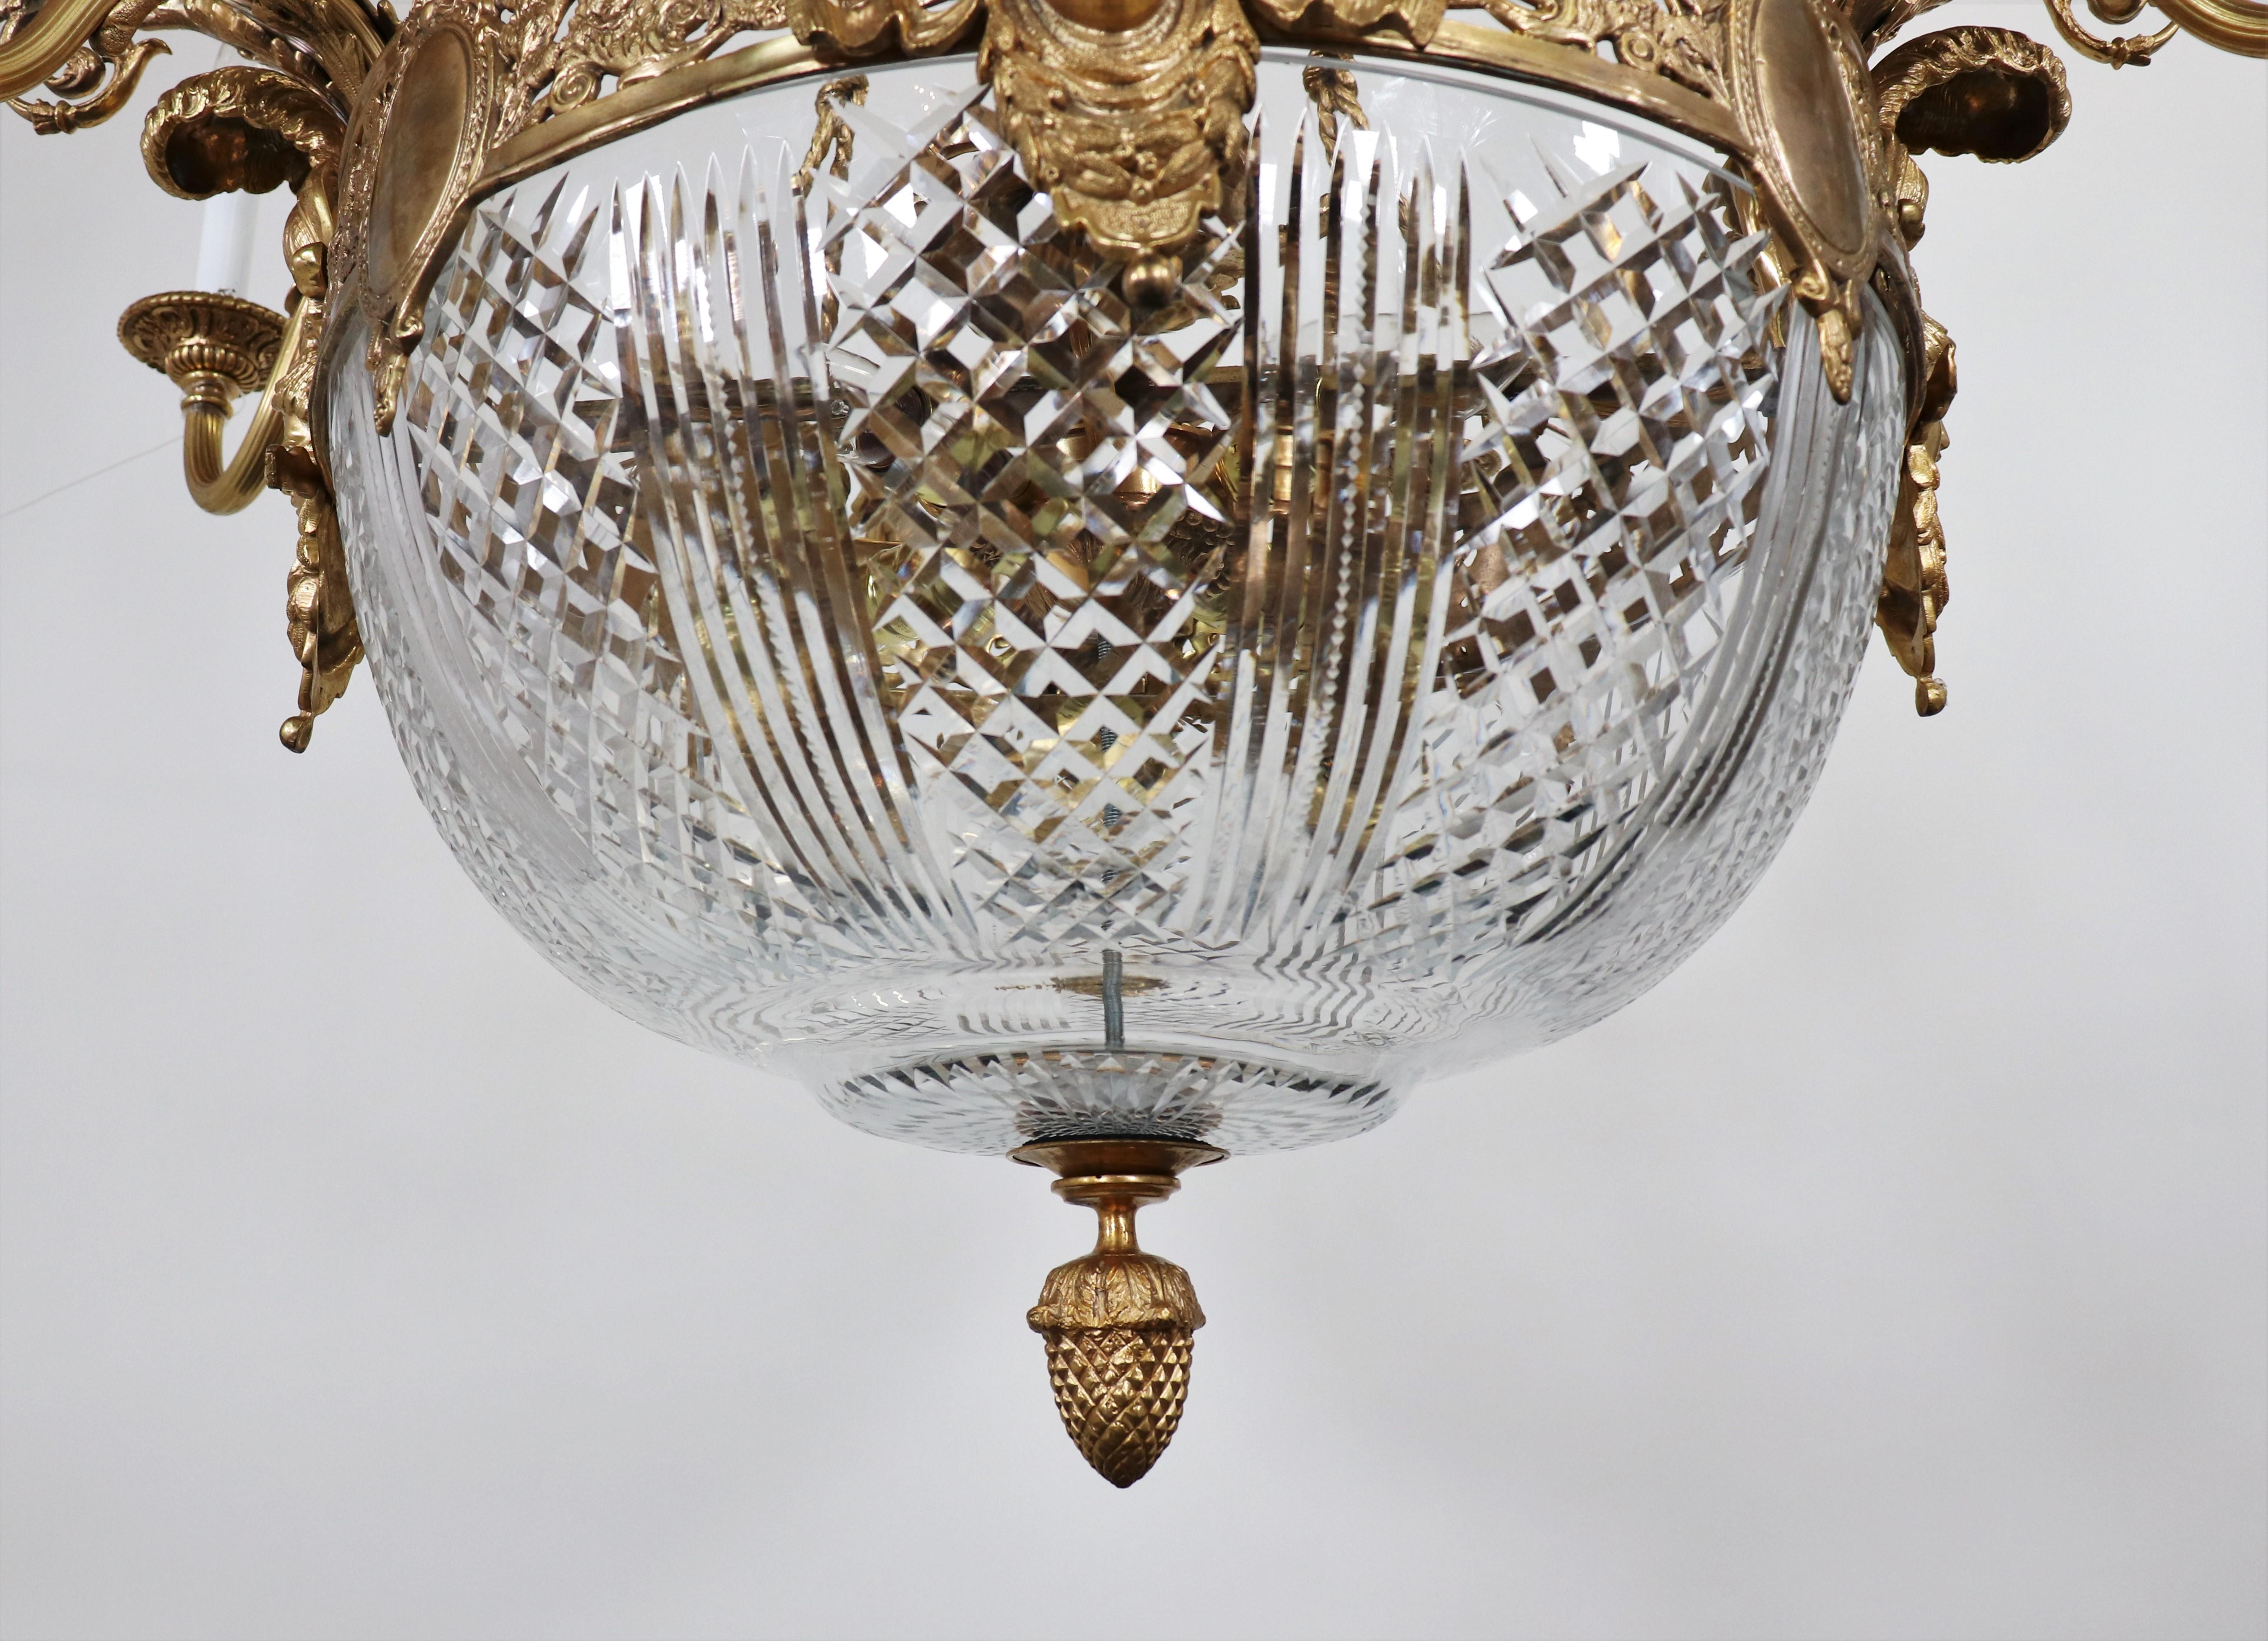 Circa 1910 French Beaux-Arts Gilt Bronze Chandelier For Sale 6